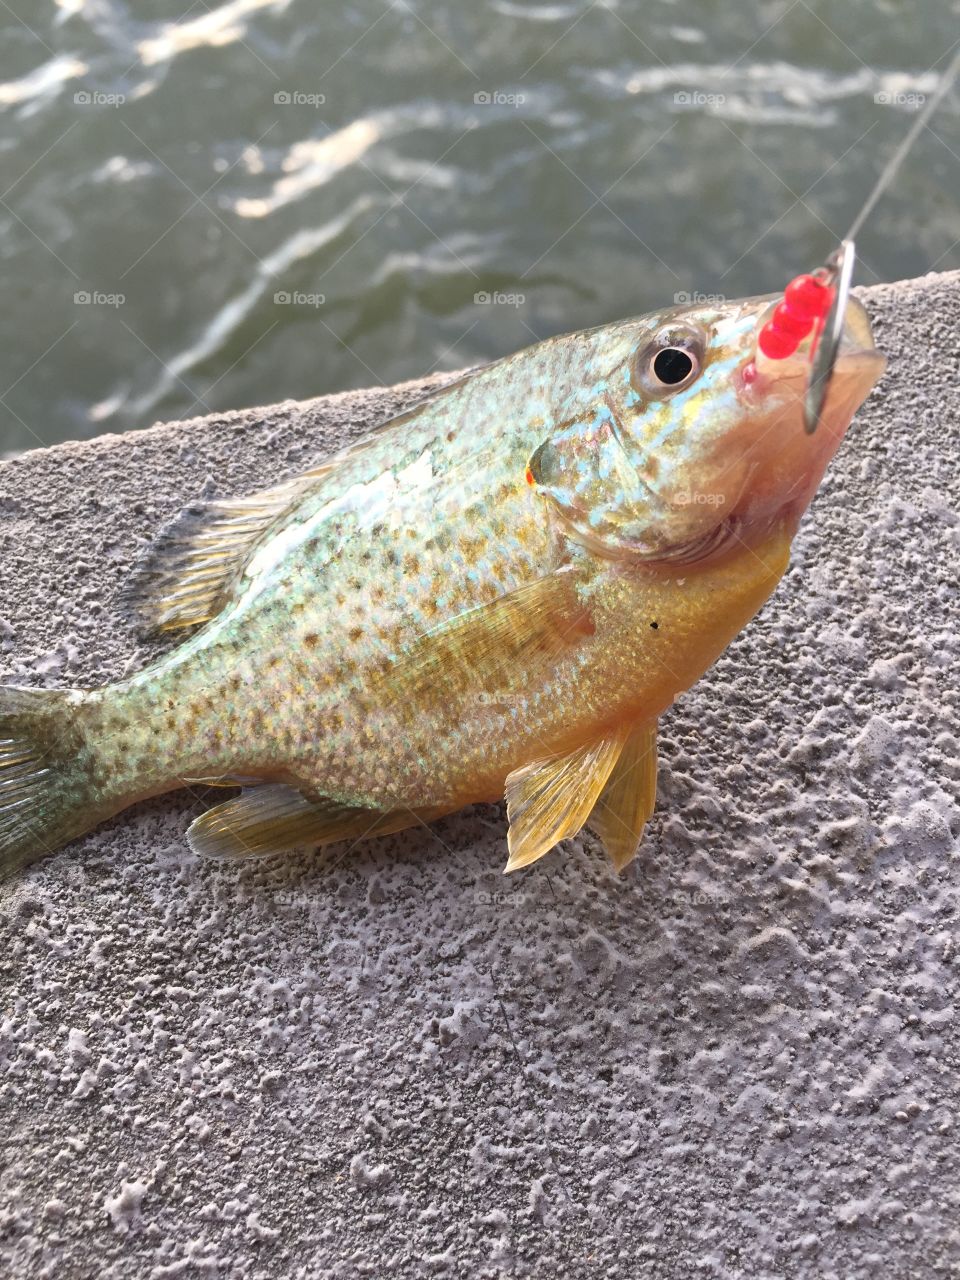 Blue gill fish with hook in mouth over railing